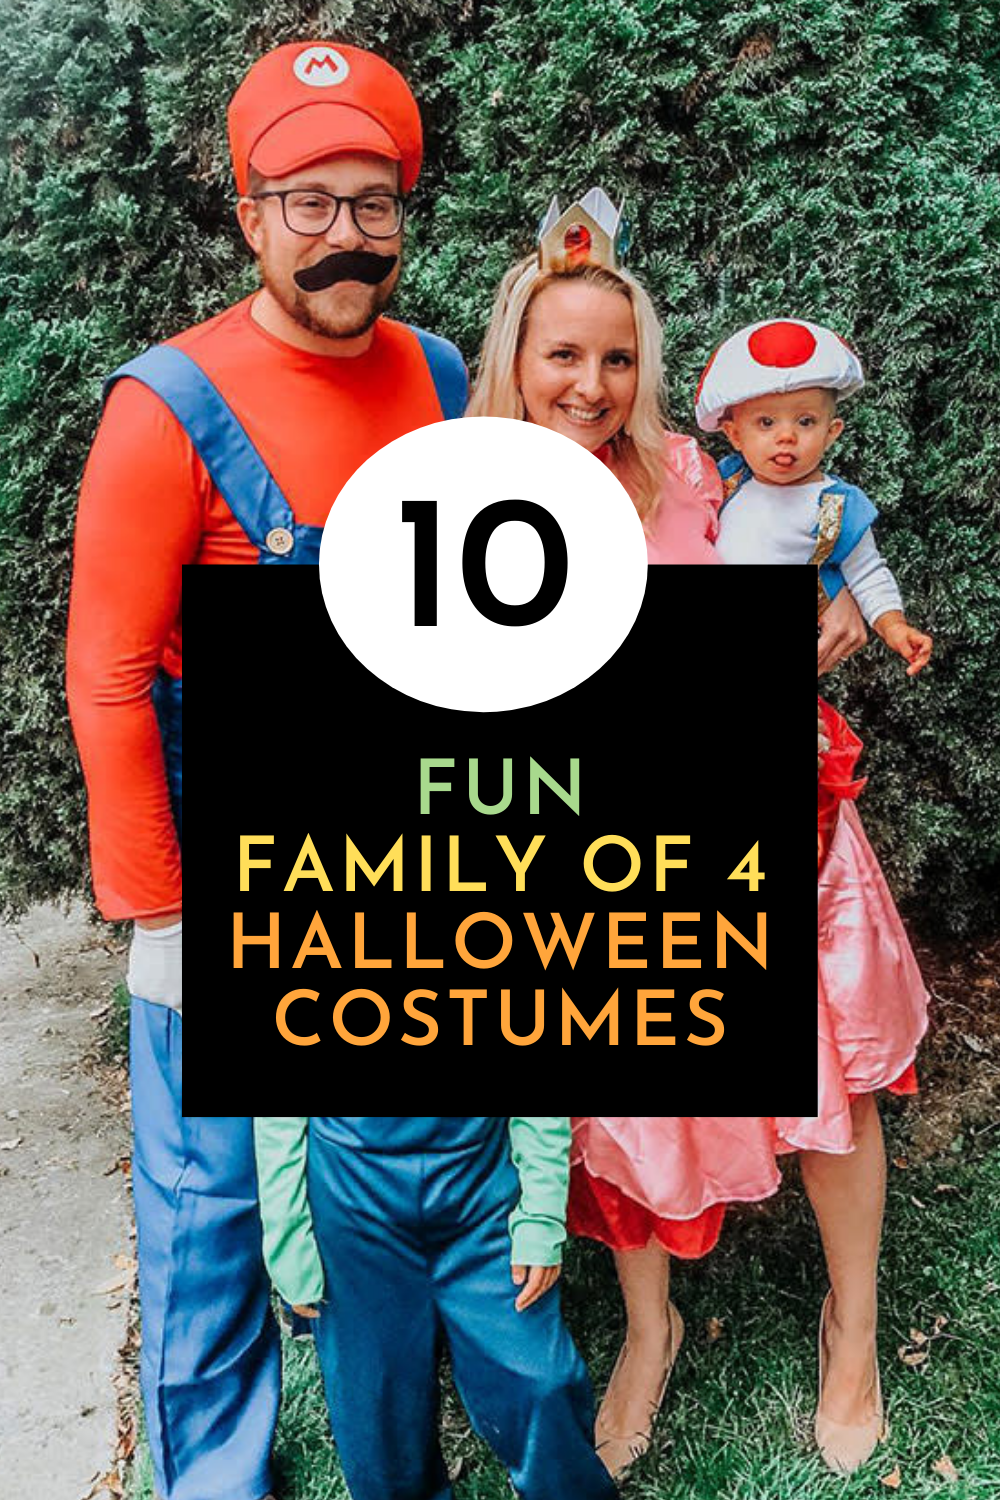 10 fun and easy family Halloween costumes for 4 by Cute Munchkin